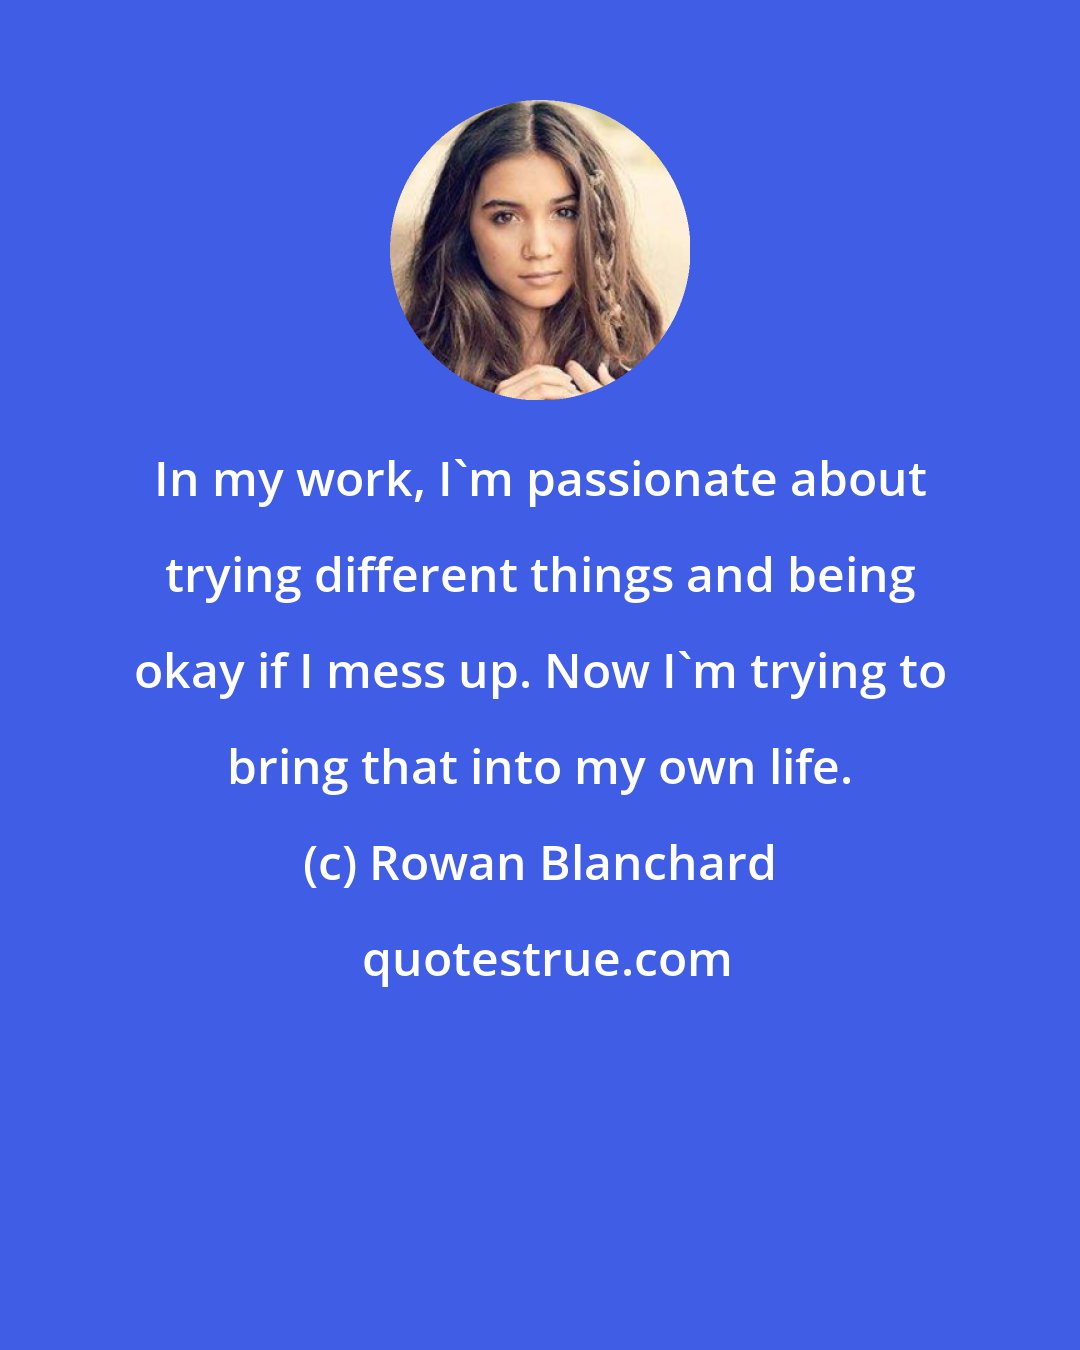 Rowan Blanchard: In my work, I'm passionate about trying different things and being okay if I mess up. Now I'm trying to bring that into my own life.